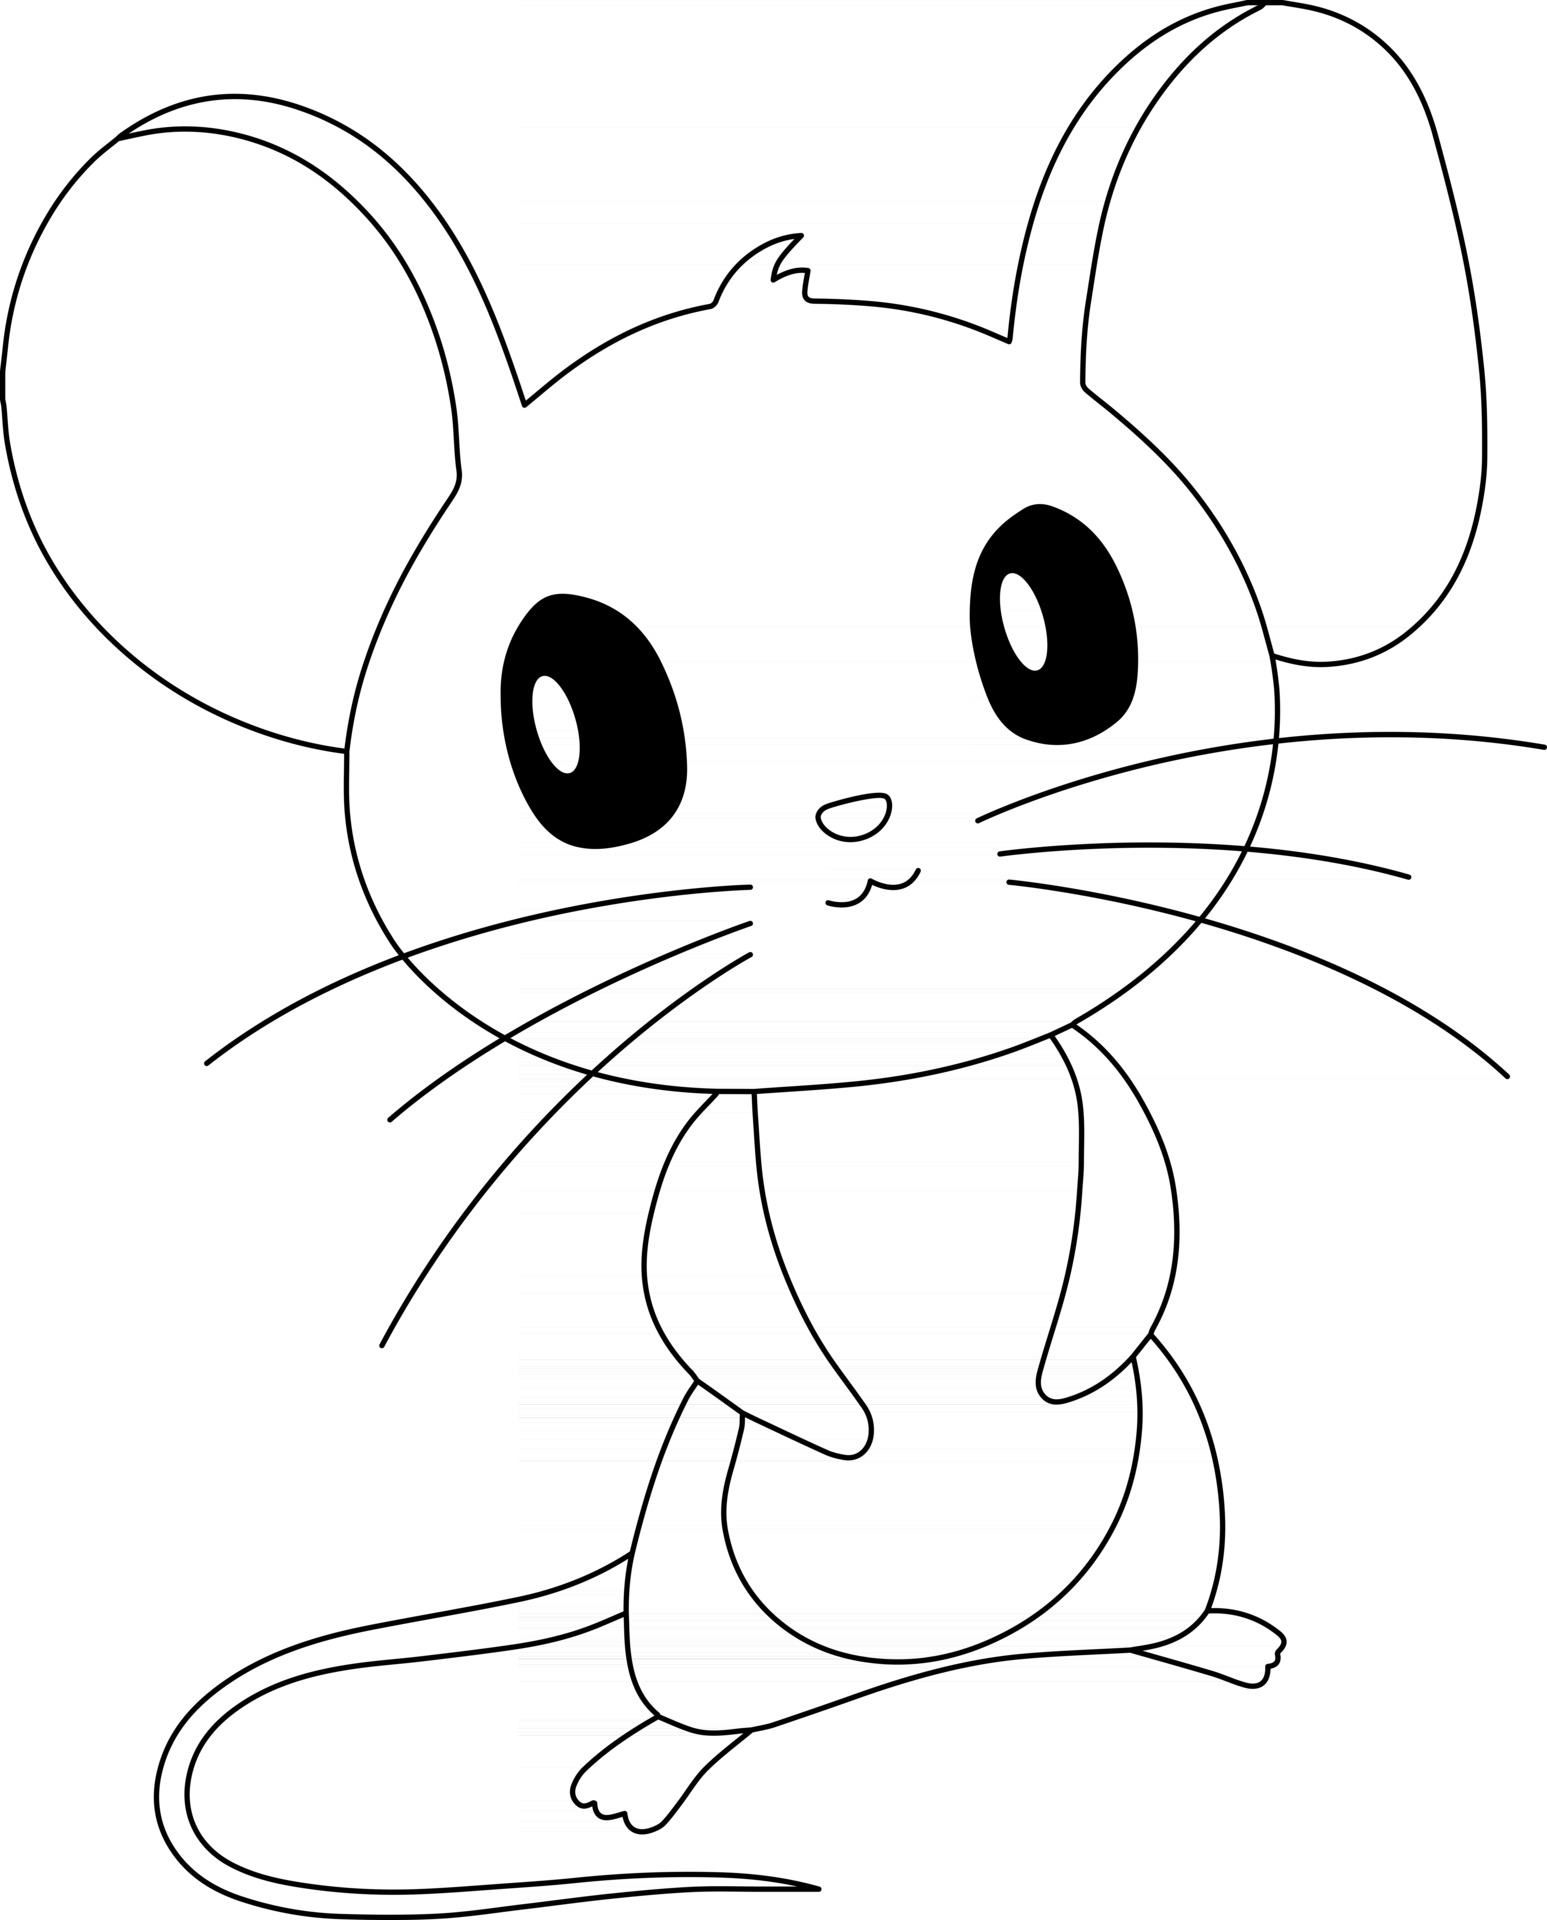 Mouse Kids Coloring Page Great for Beginner Coloring Book 20 ...